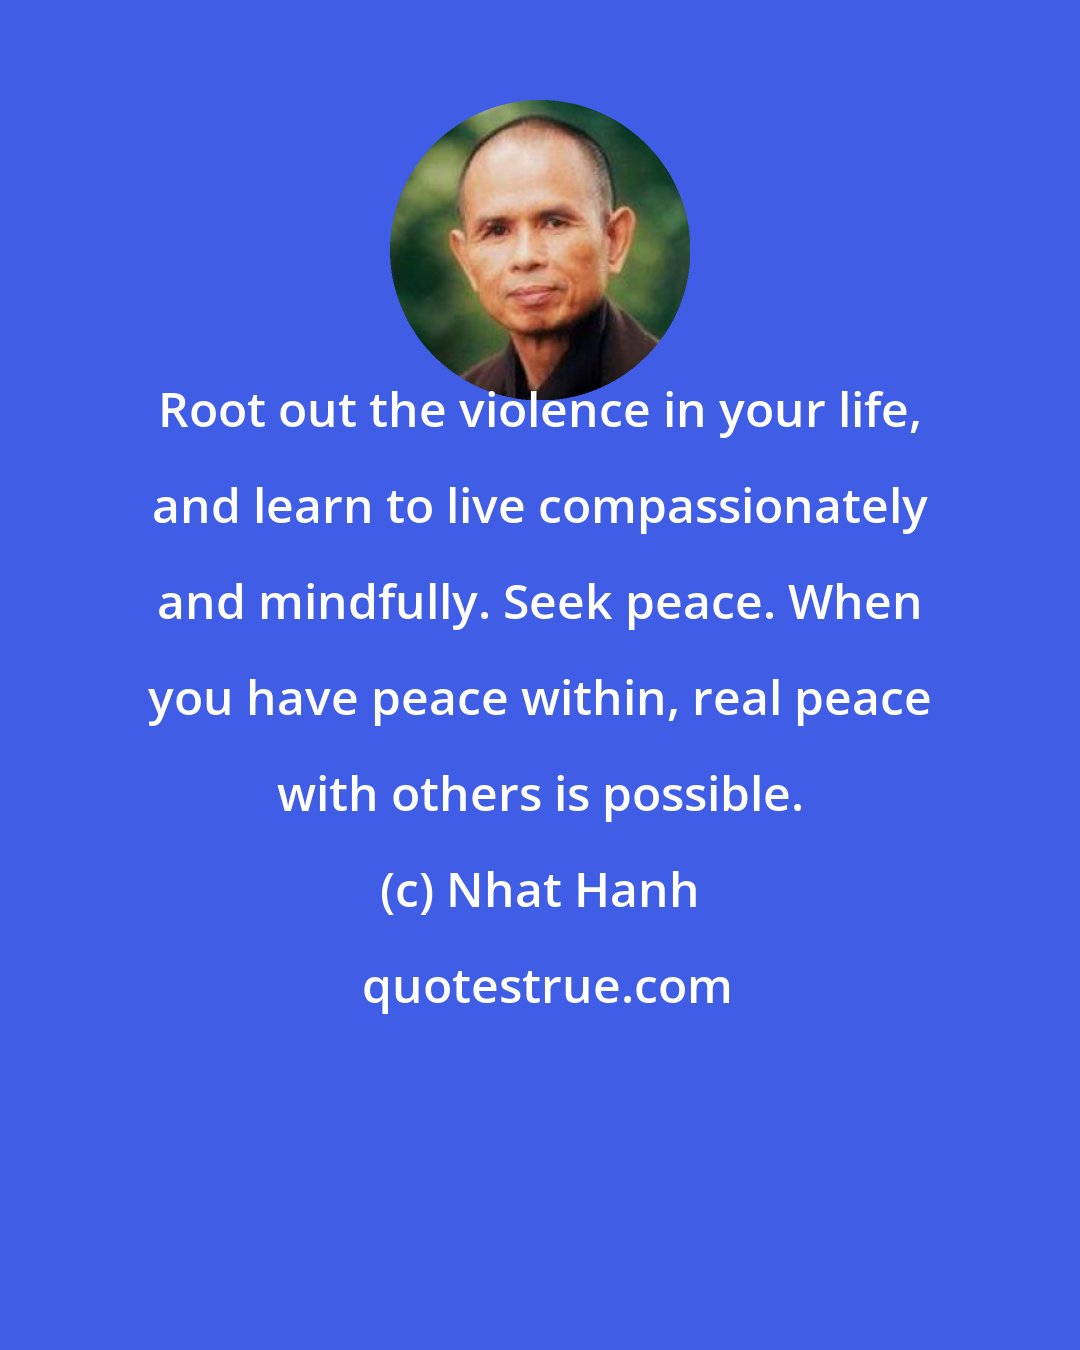 Nhat Hanh: Root out the violence in your life, and learn to live compassionately and mindfully. Seek peace. When you have peace within, real peace with others is possible.